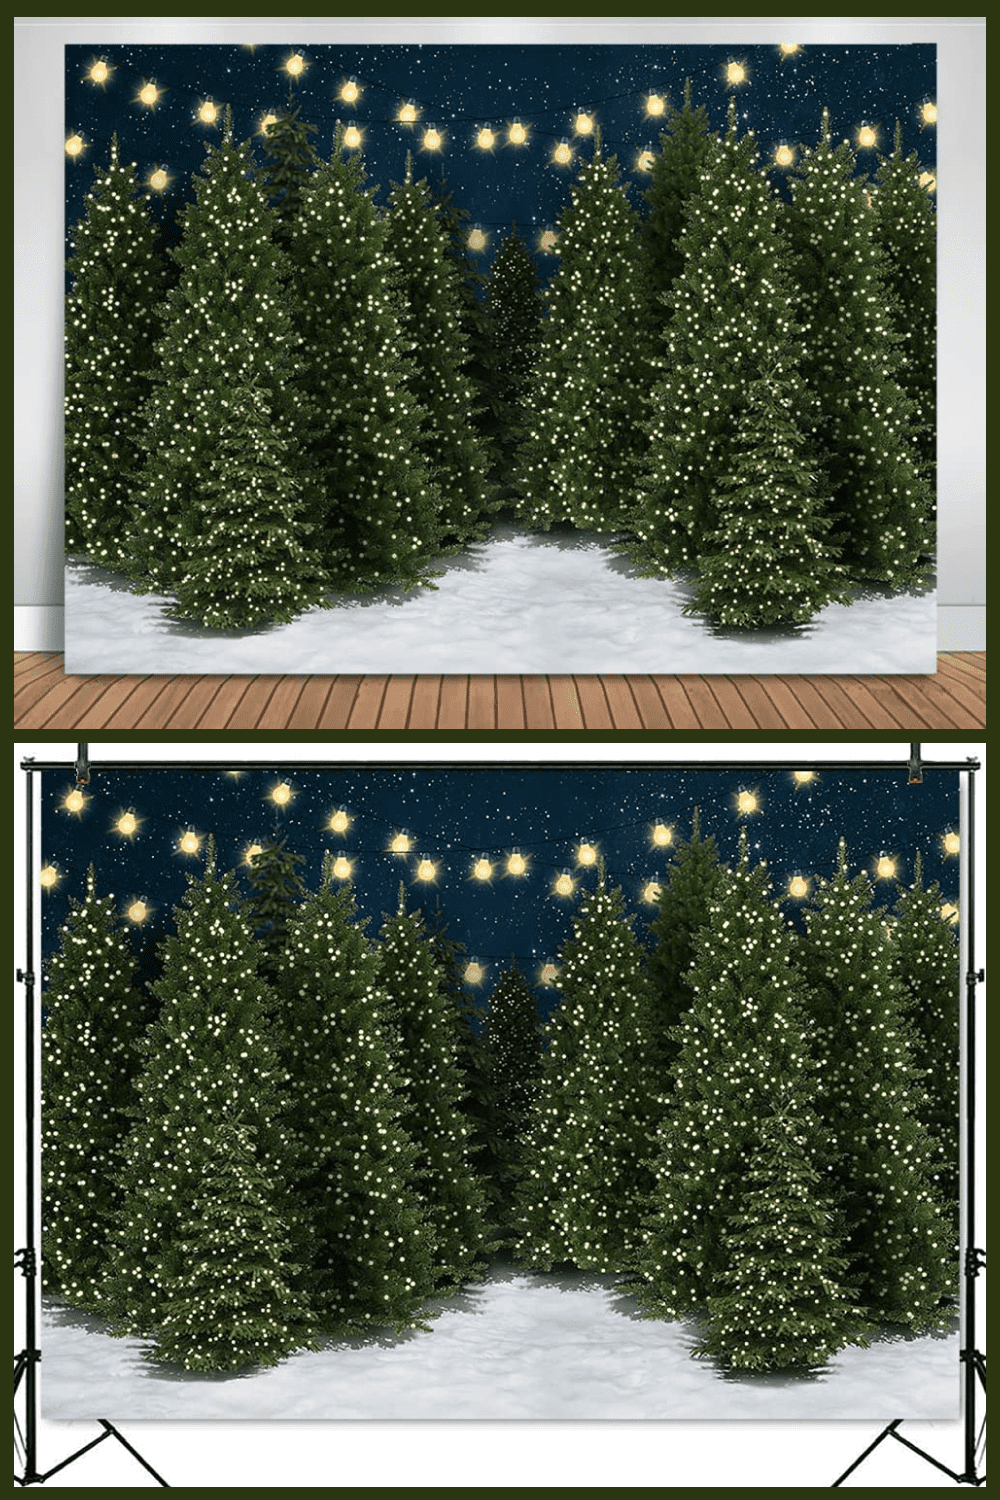 trees with twinkling garlands on the starry sky background.